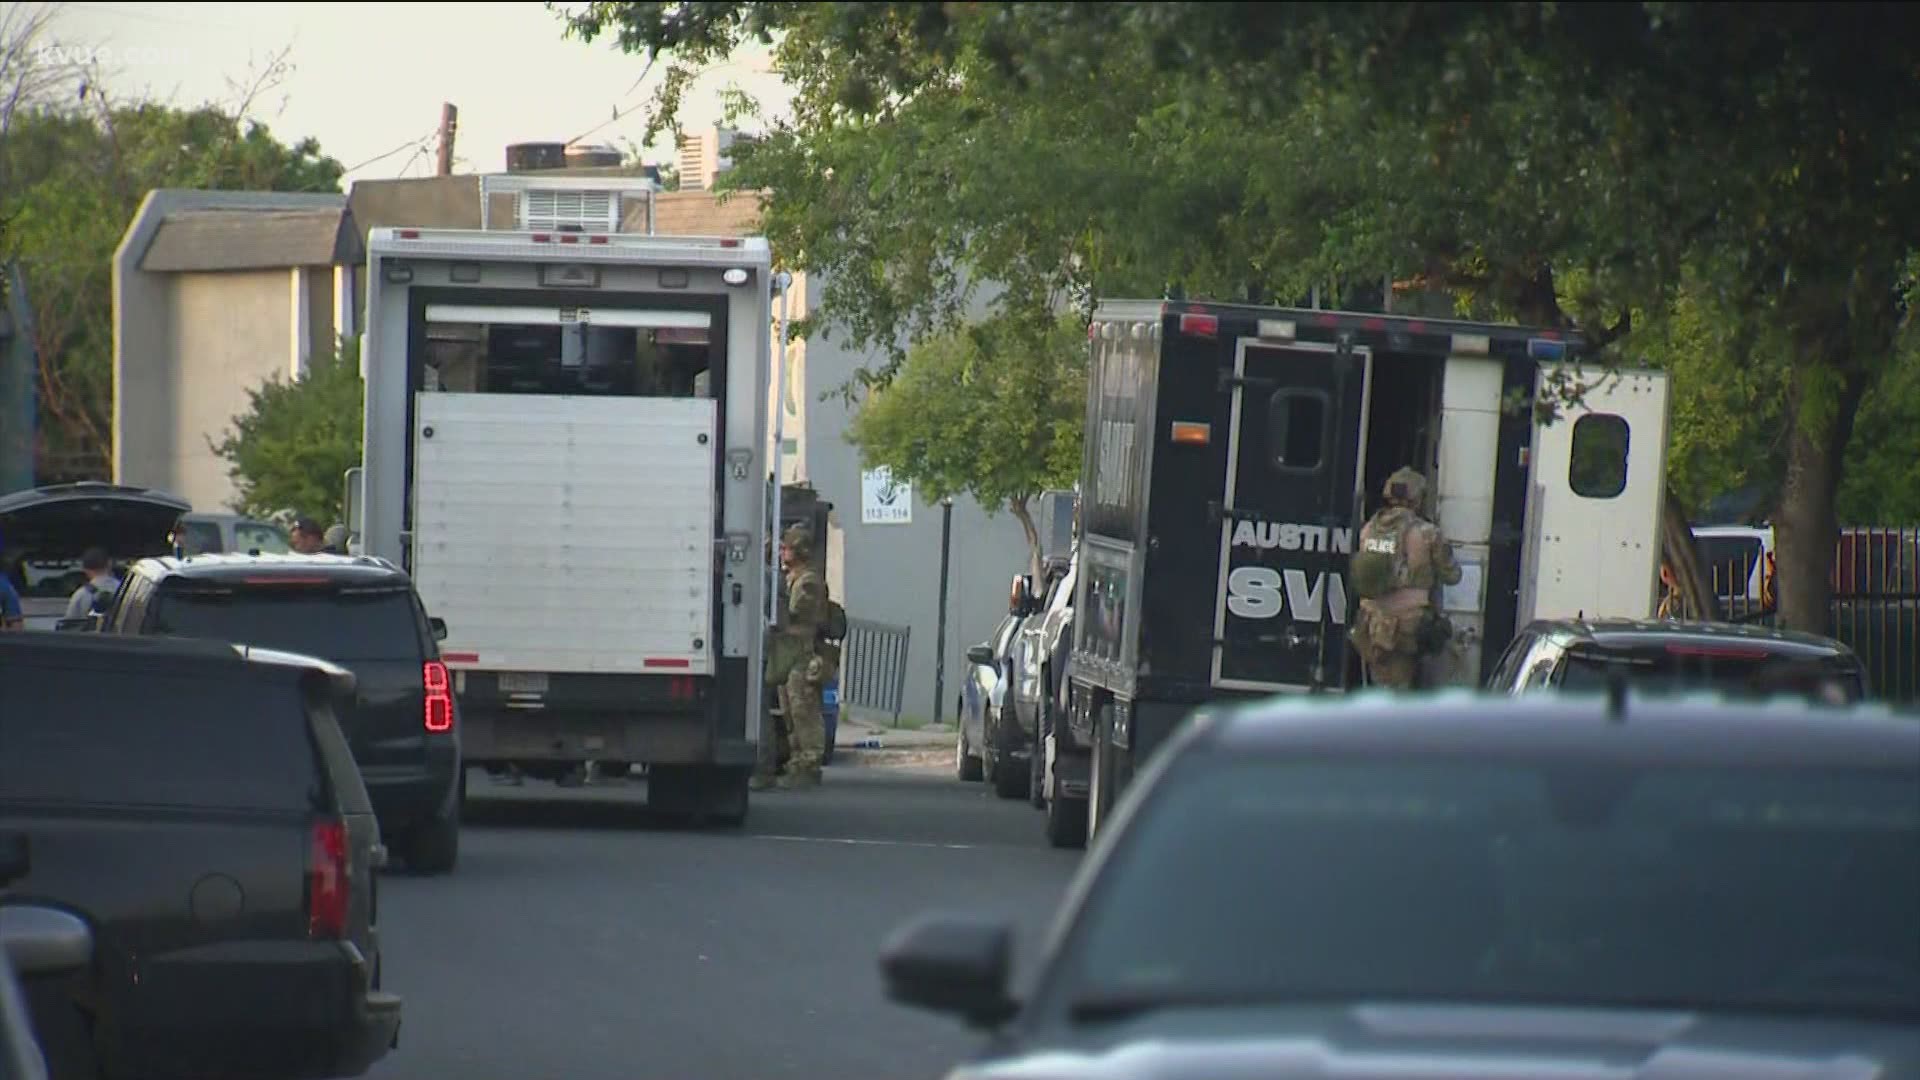 SWAT team members and other officers are trying to arrest two men who have barricaded themselves inside an apartment.